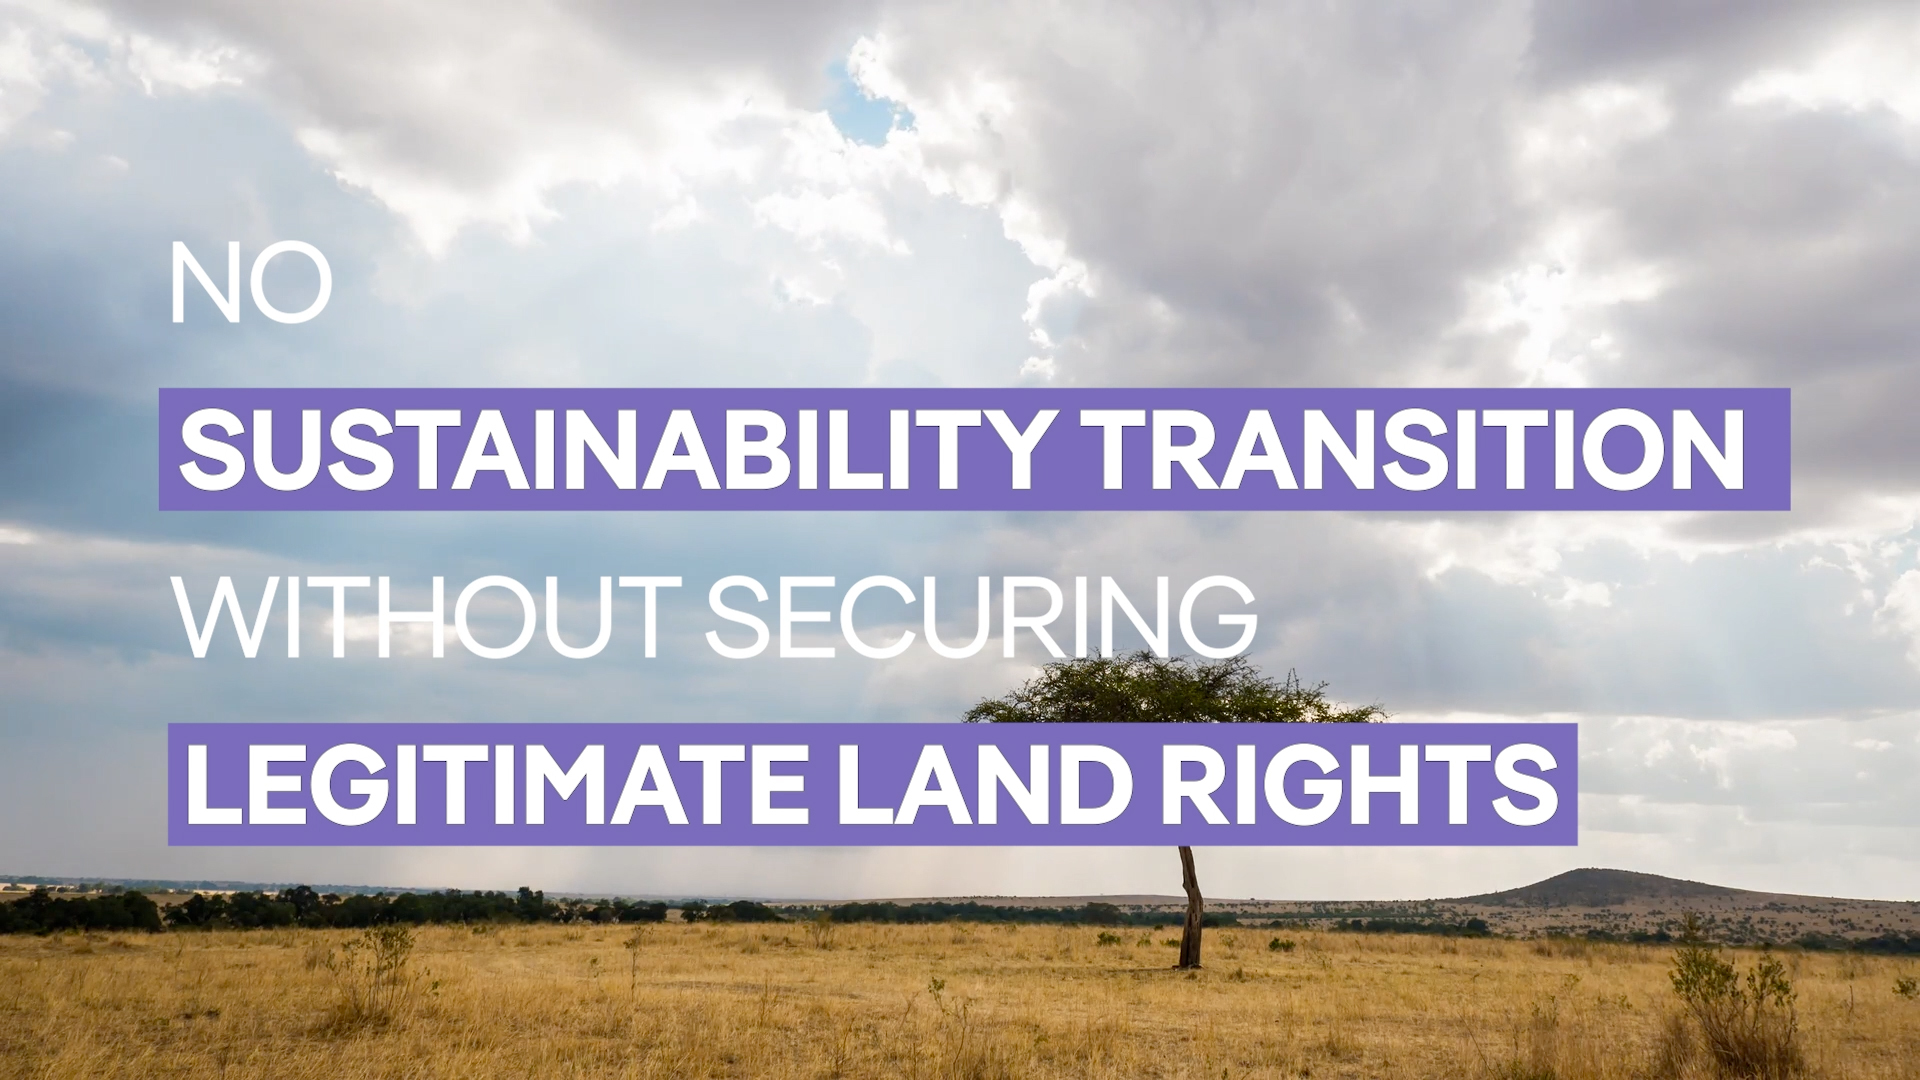 No Sustainability Transition Without Securing Legitimate Land Rights - TMG @ COP 15